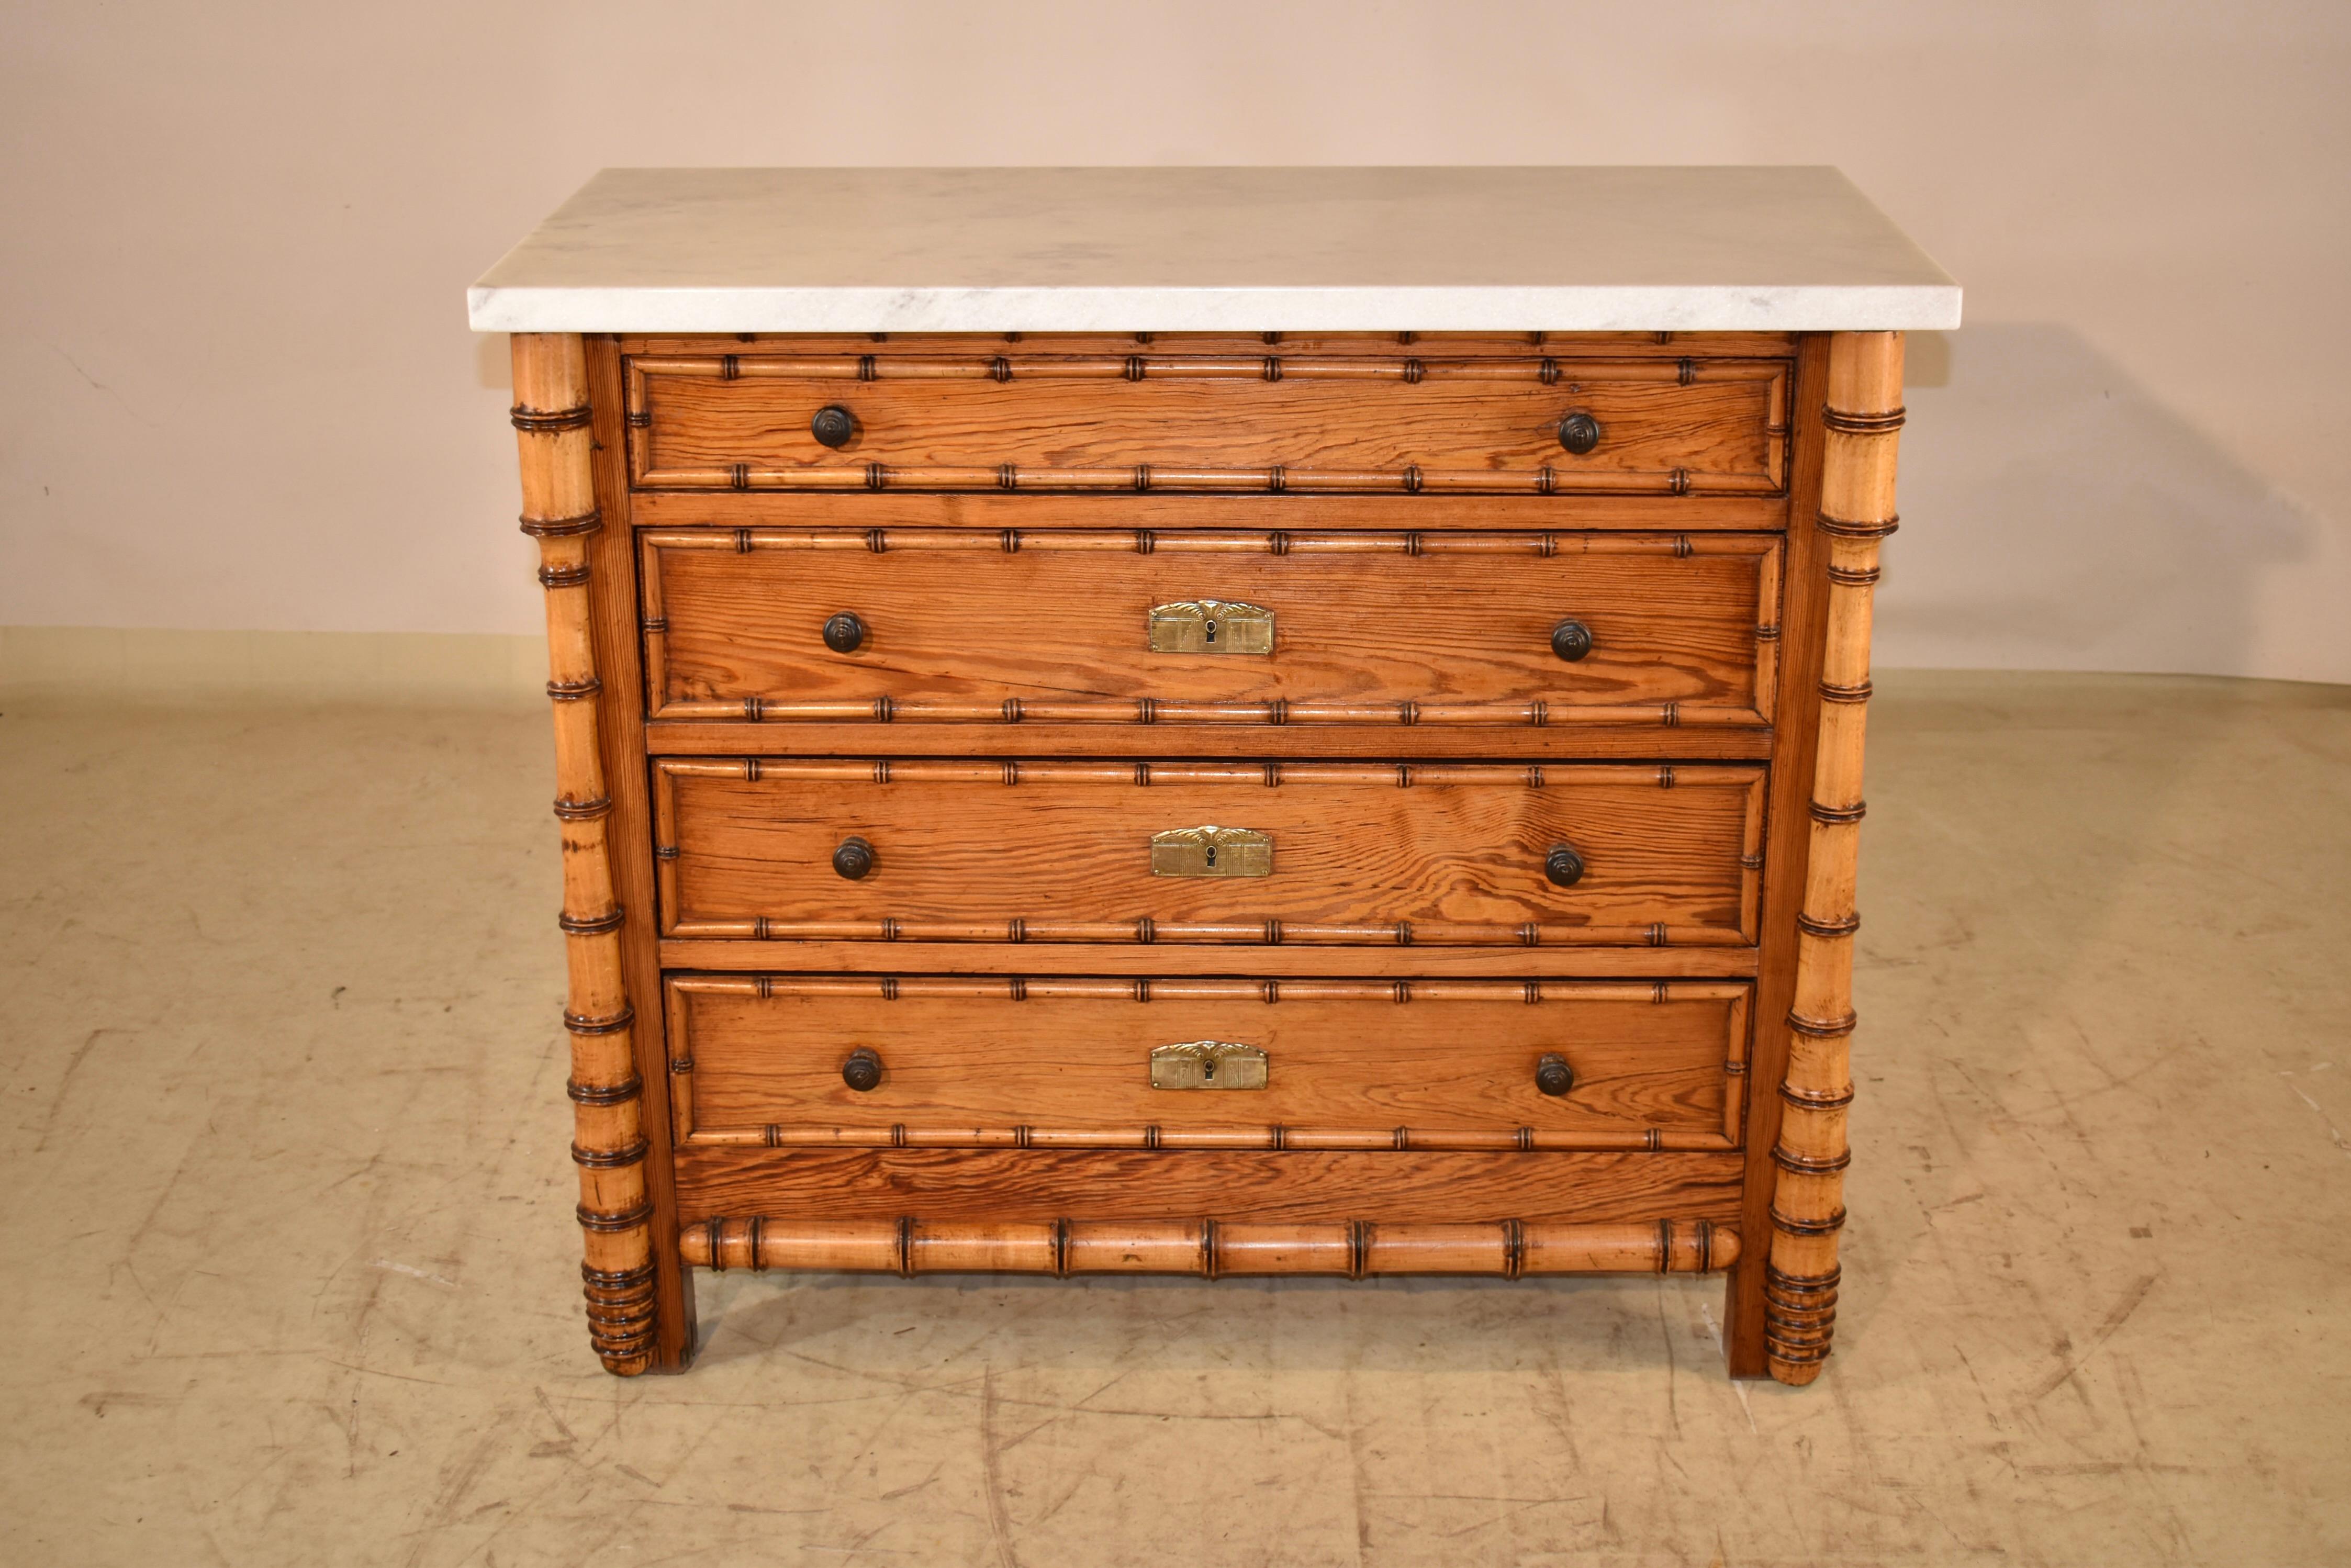 19th century chest of drawers from France.  The marble top is made from Carrara marble and has been replaced.  This piece has four drawers all with faux bamboo applied moldings turned from cherry.  The chest is made from pitch pine, and has gorgeous